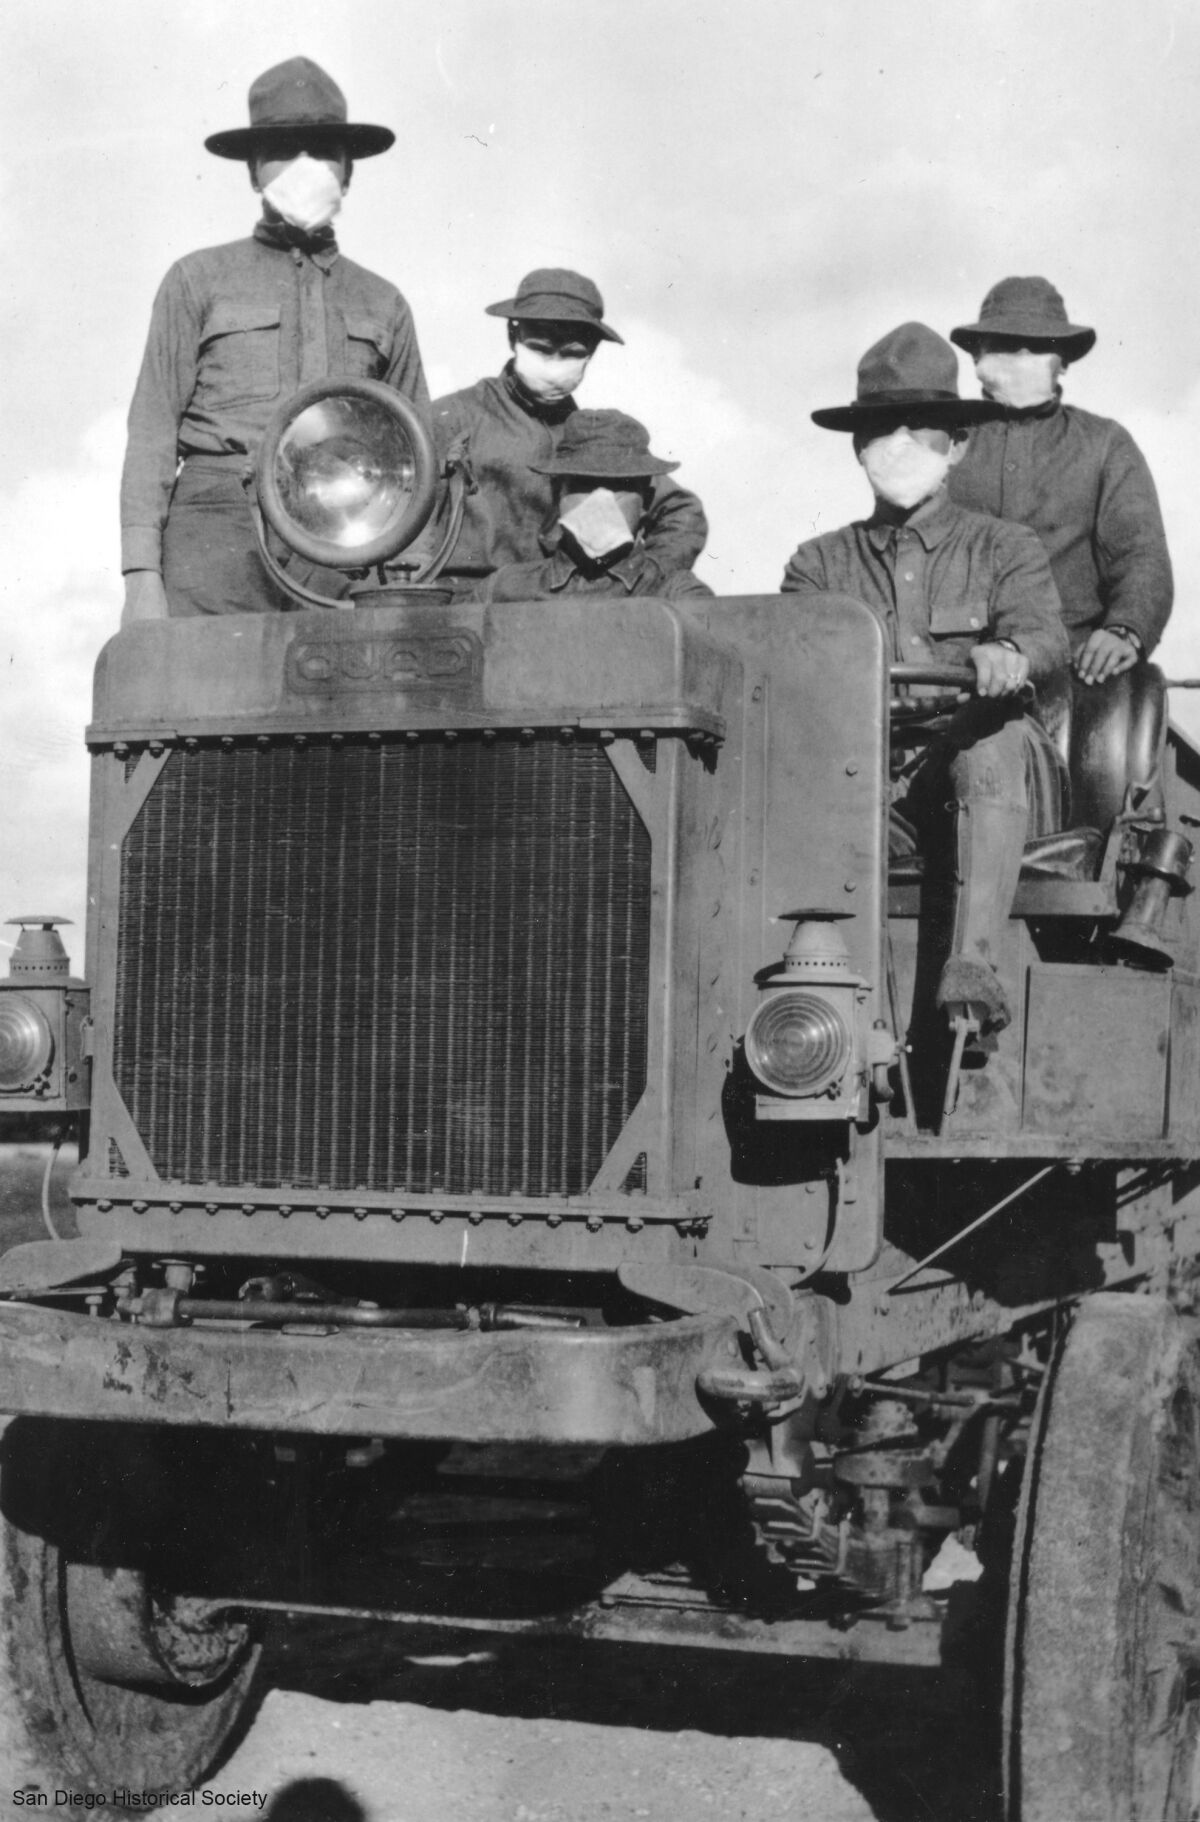 Circa 1917_Military personnel on truck at Camp Kearny during flu epidemic.